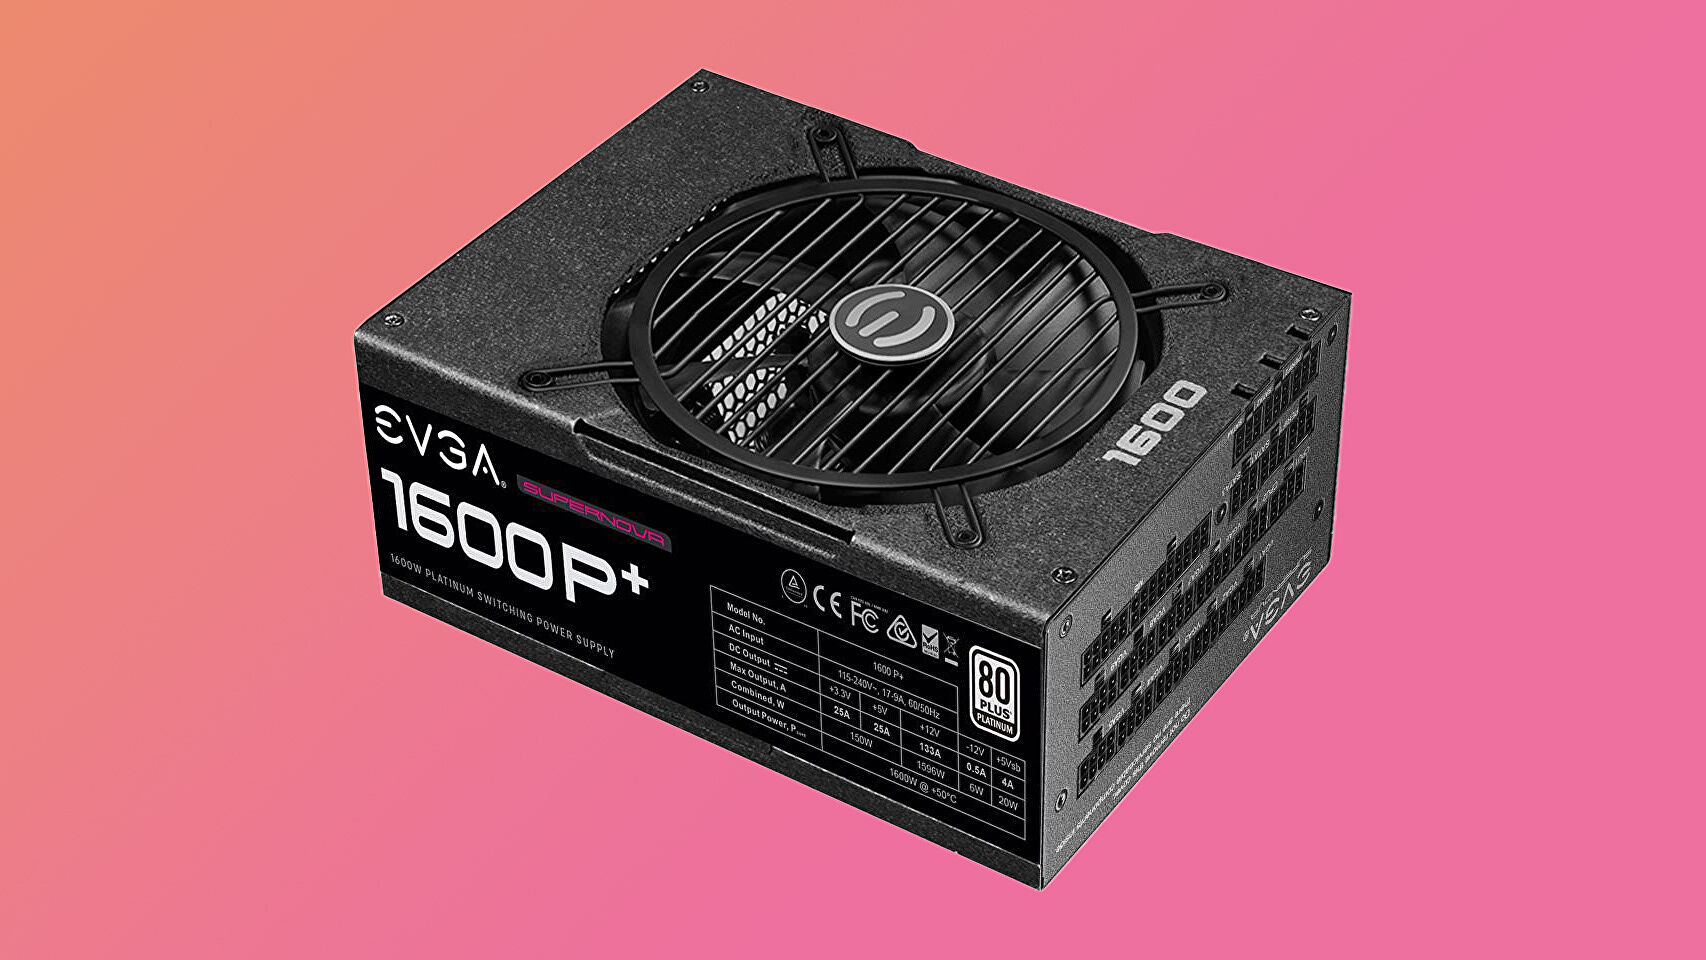 This EVGA 1600W Platinum PSU is down to $200 at Newegg